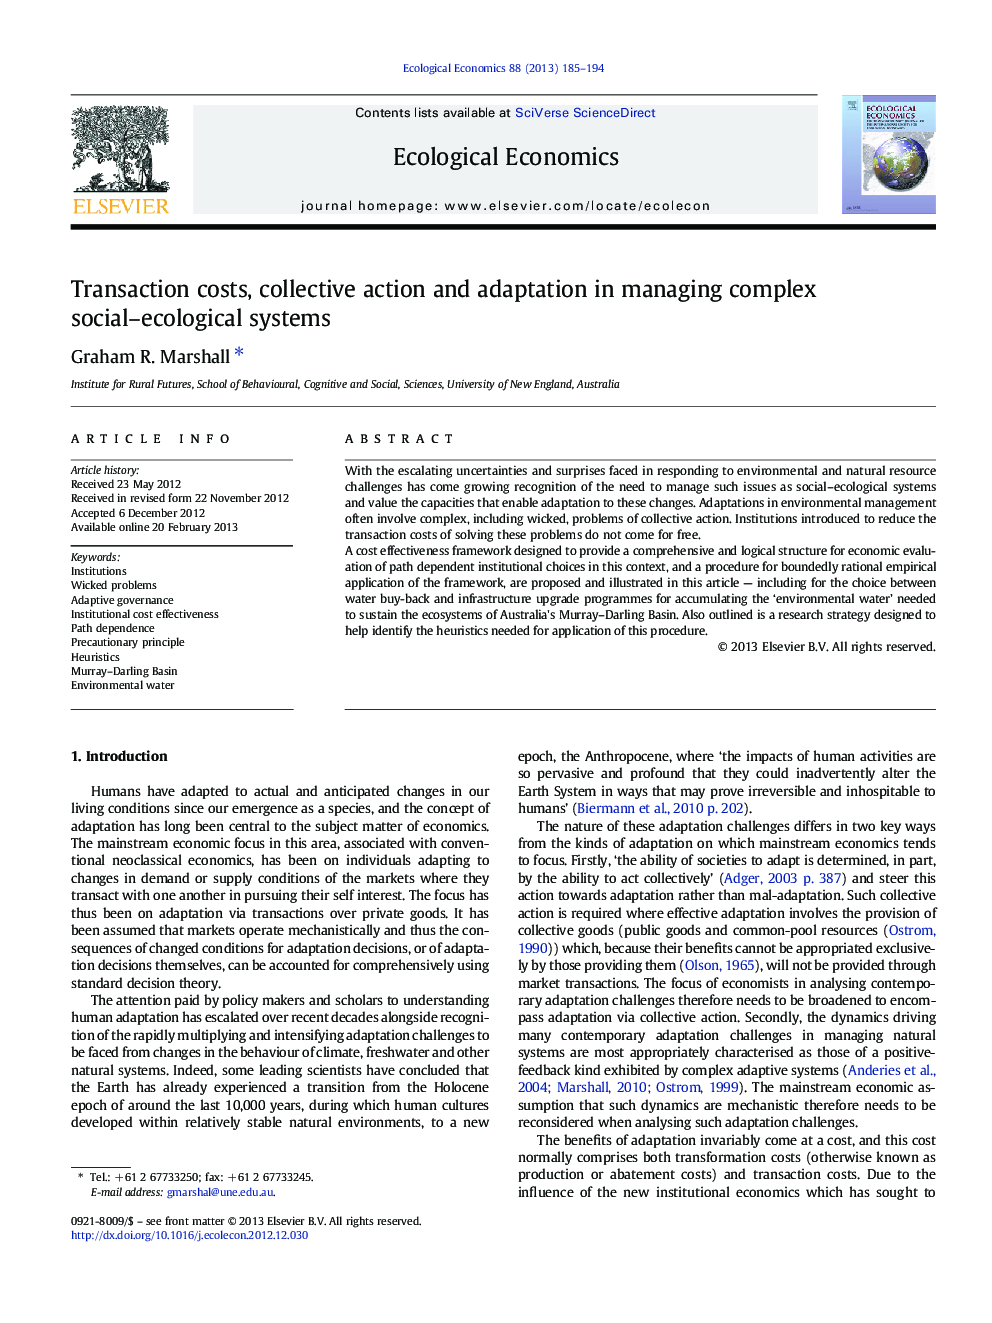 Transaction costs, collective action and adaptation in managing complex social-ecological systems